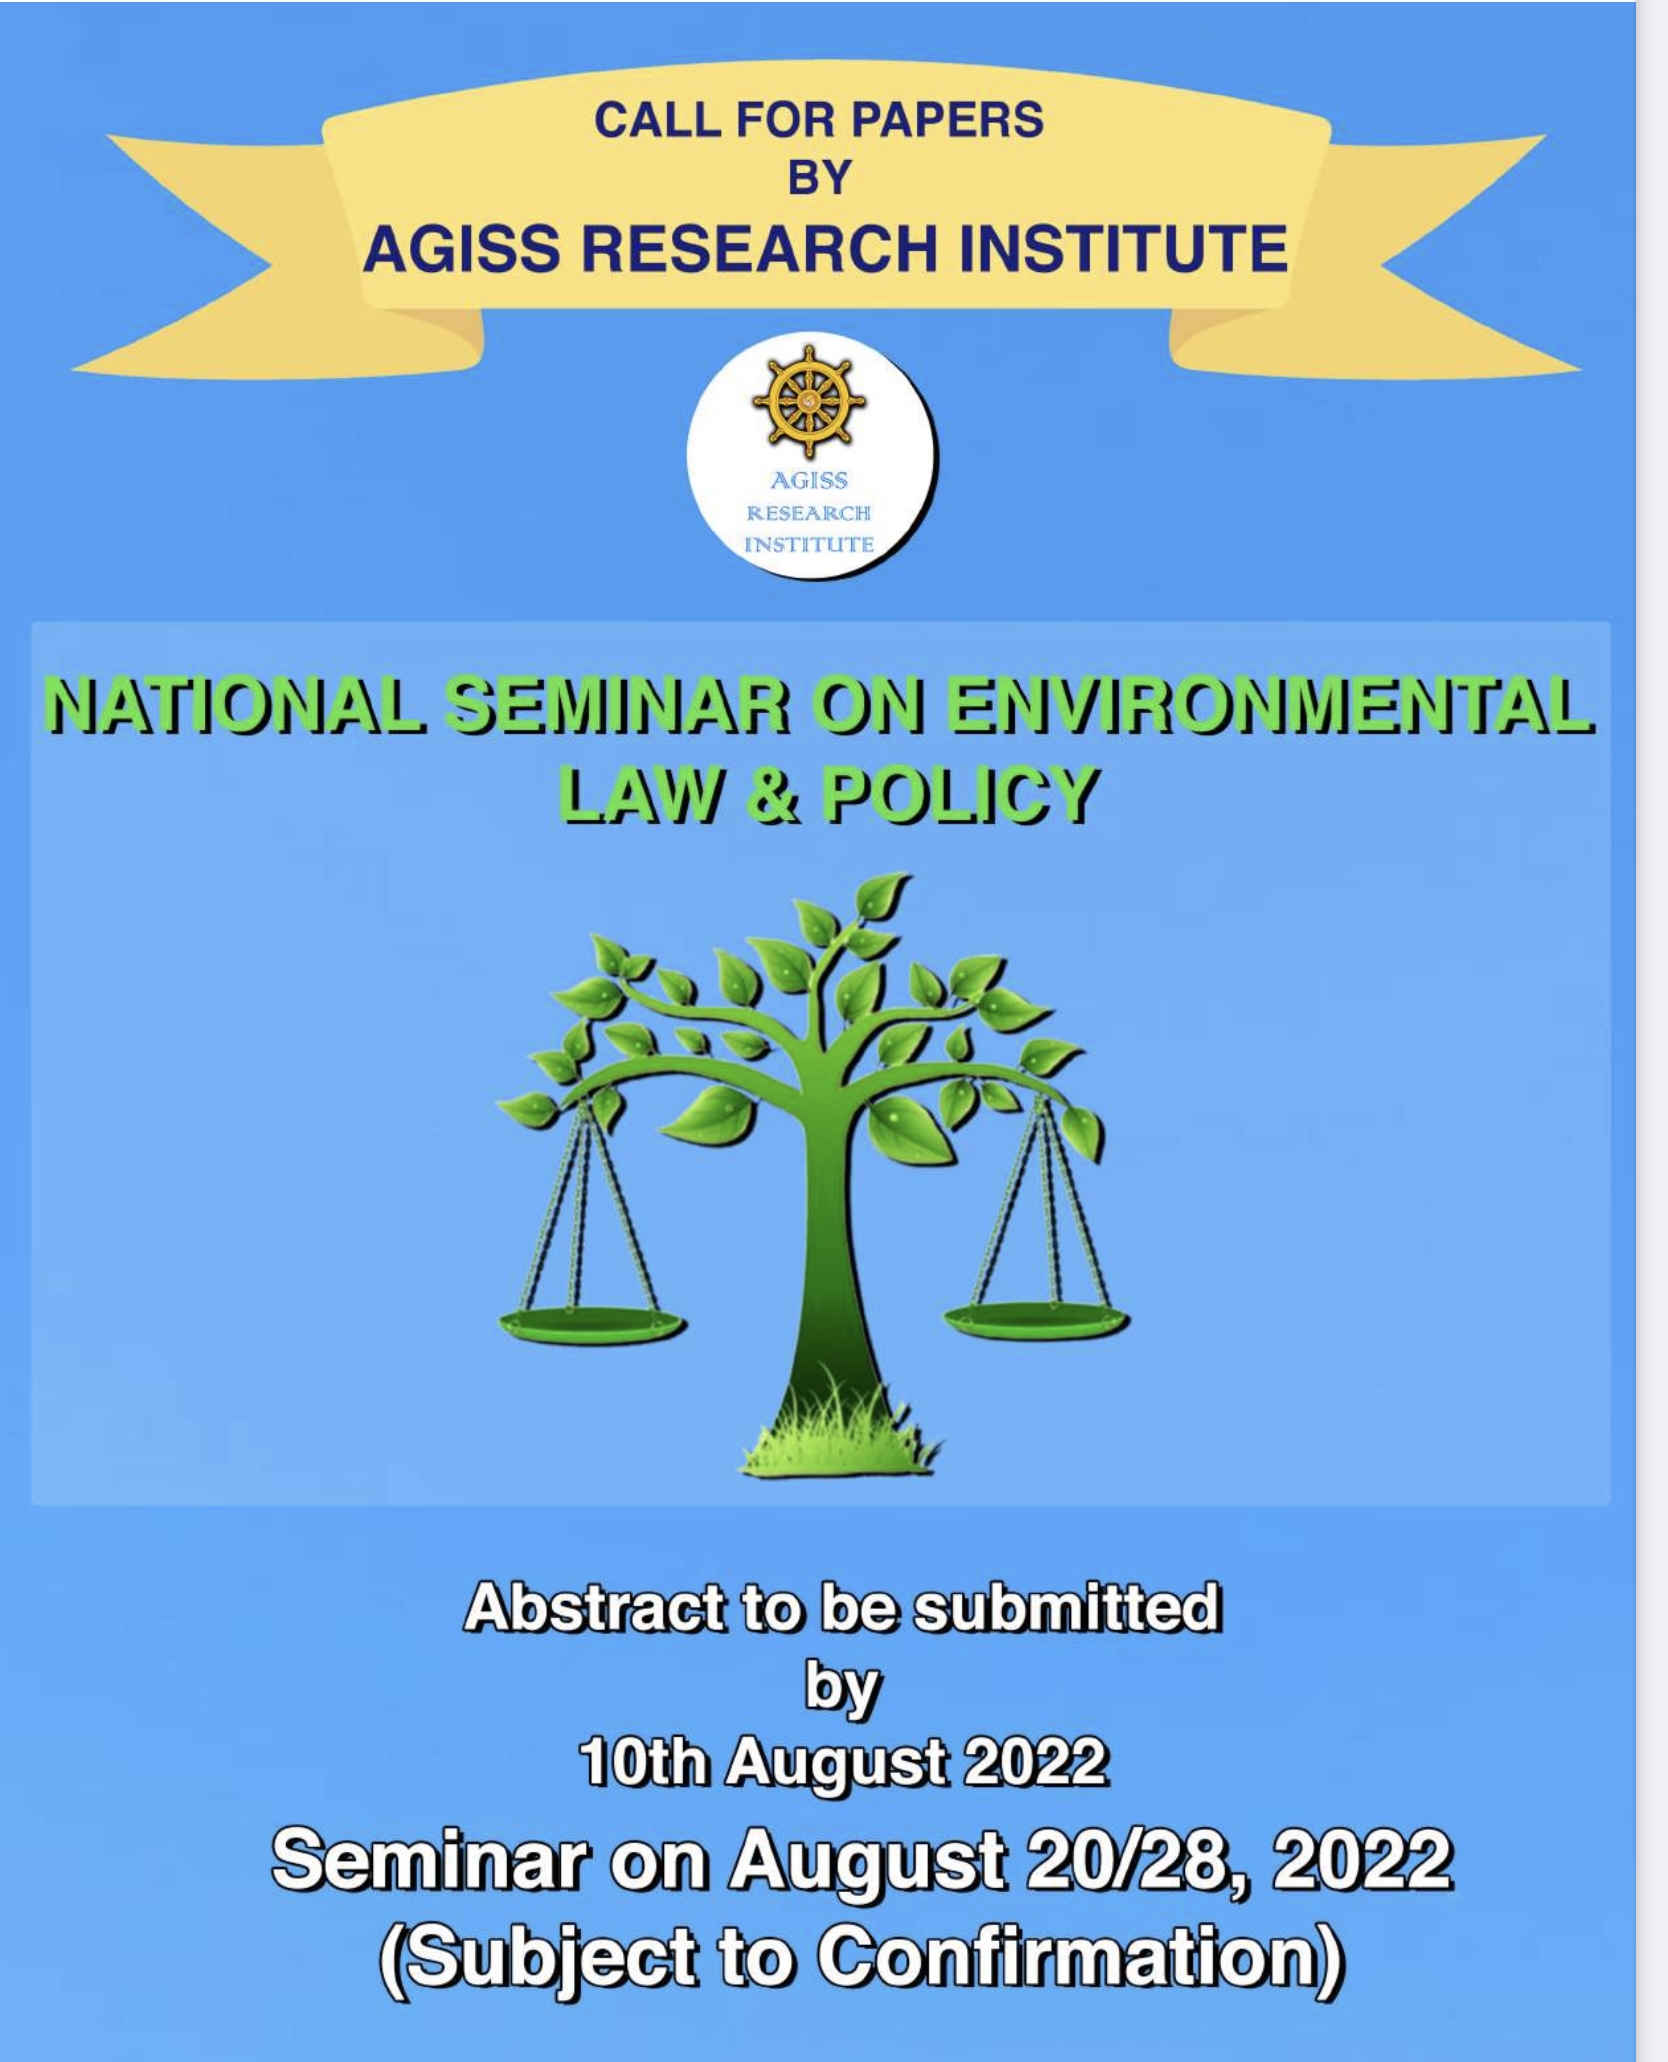 National Seminar on Environmental Law & Policy: BY AGISS RESEARCH INSTITUTE